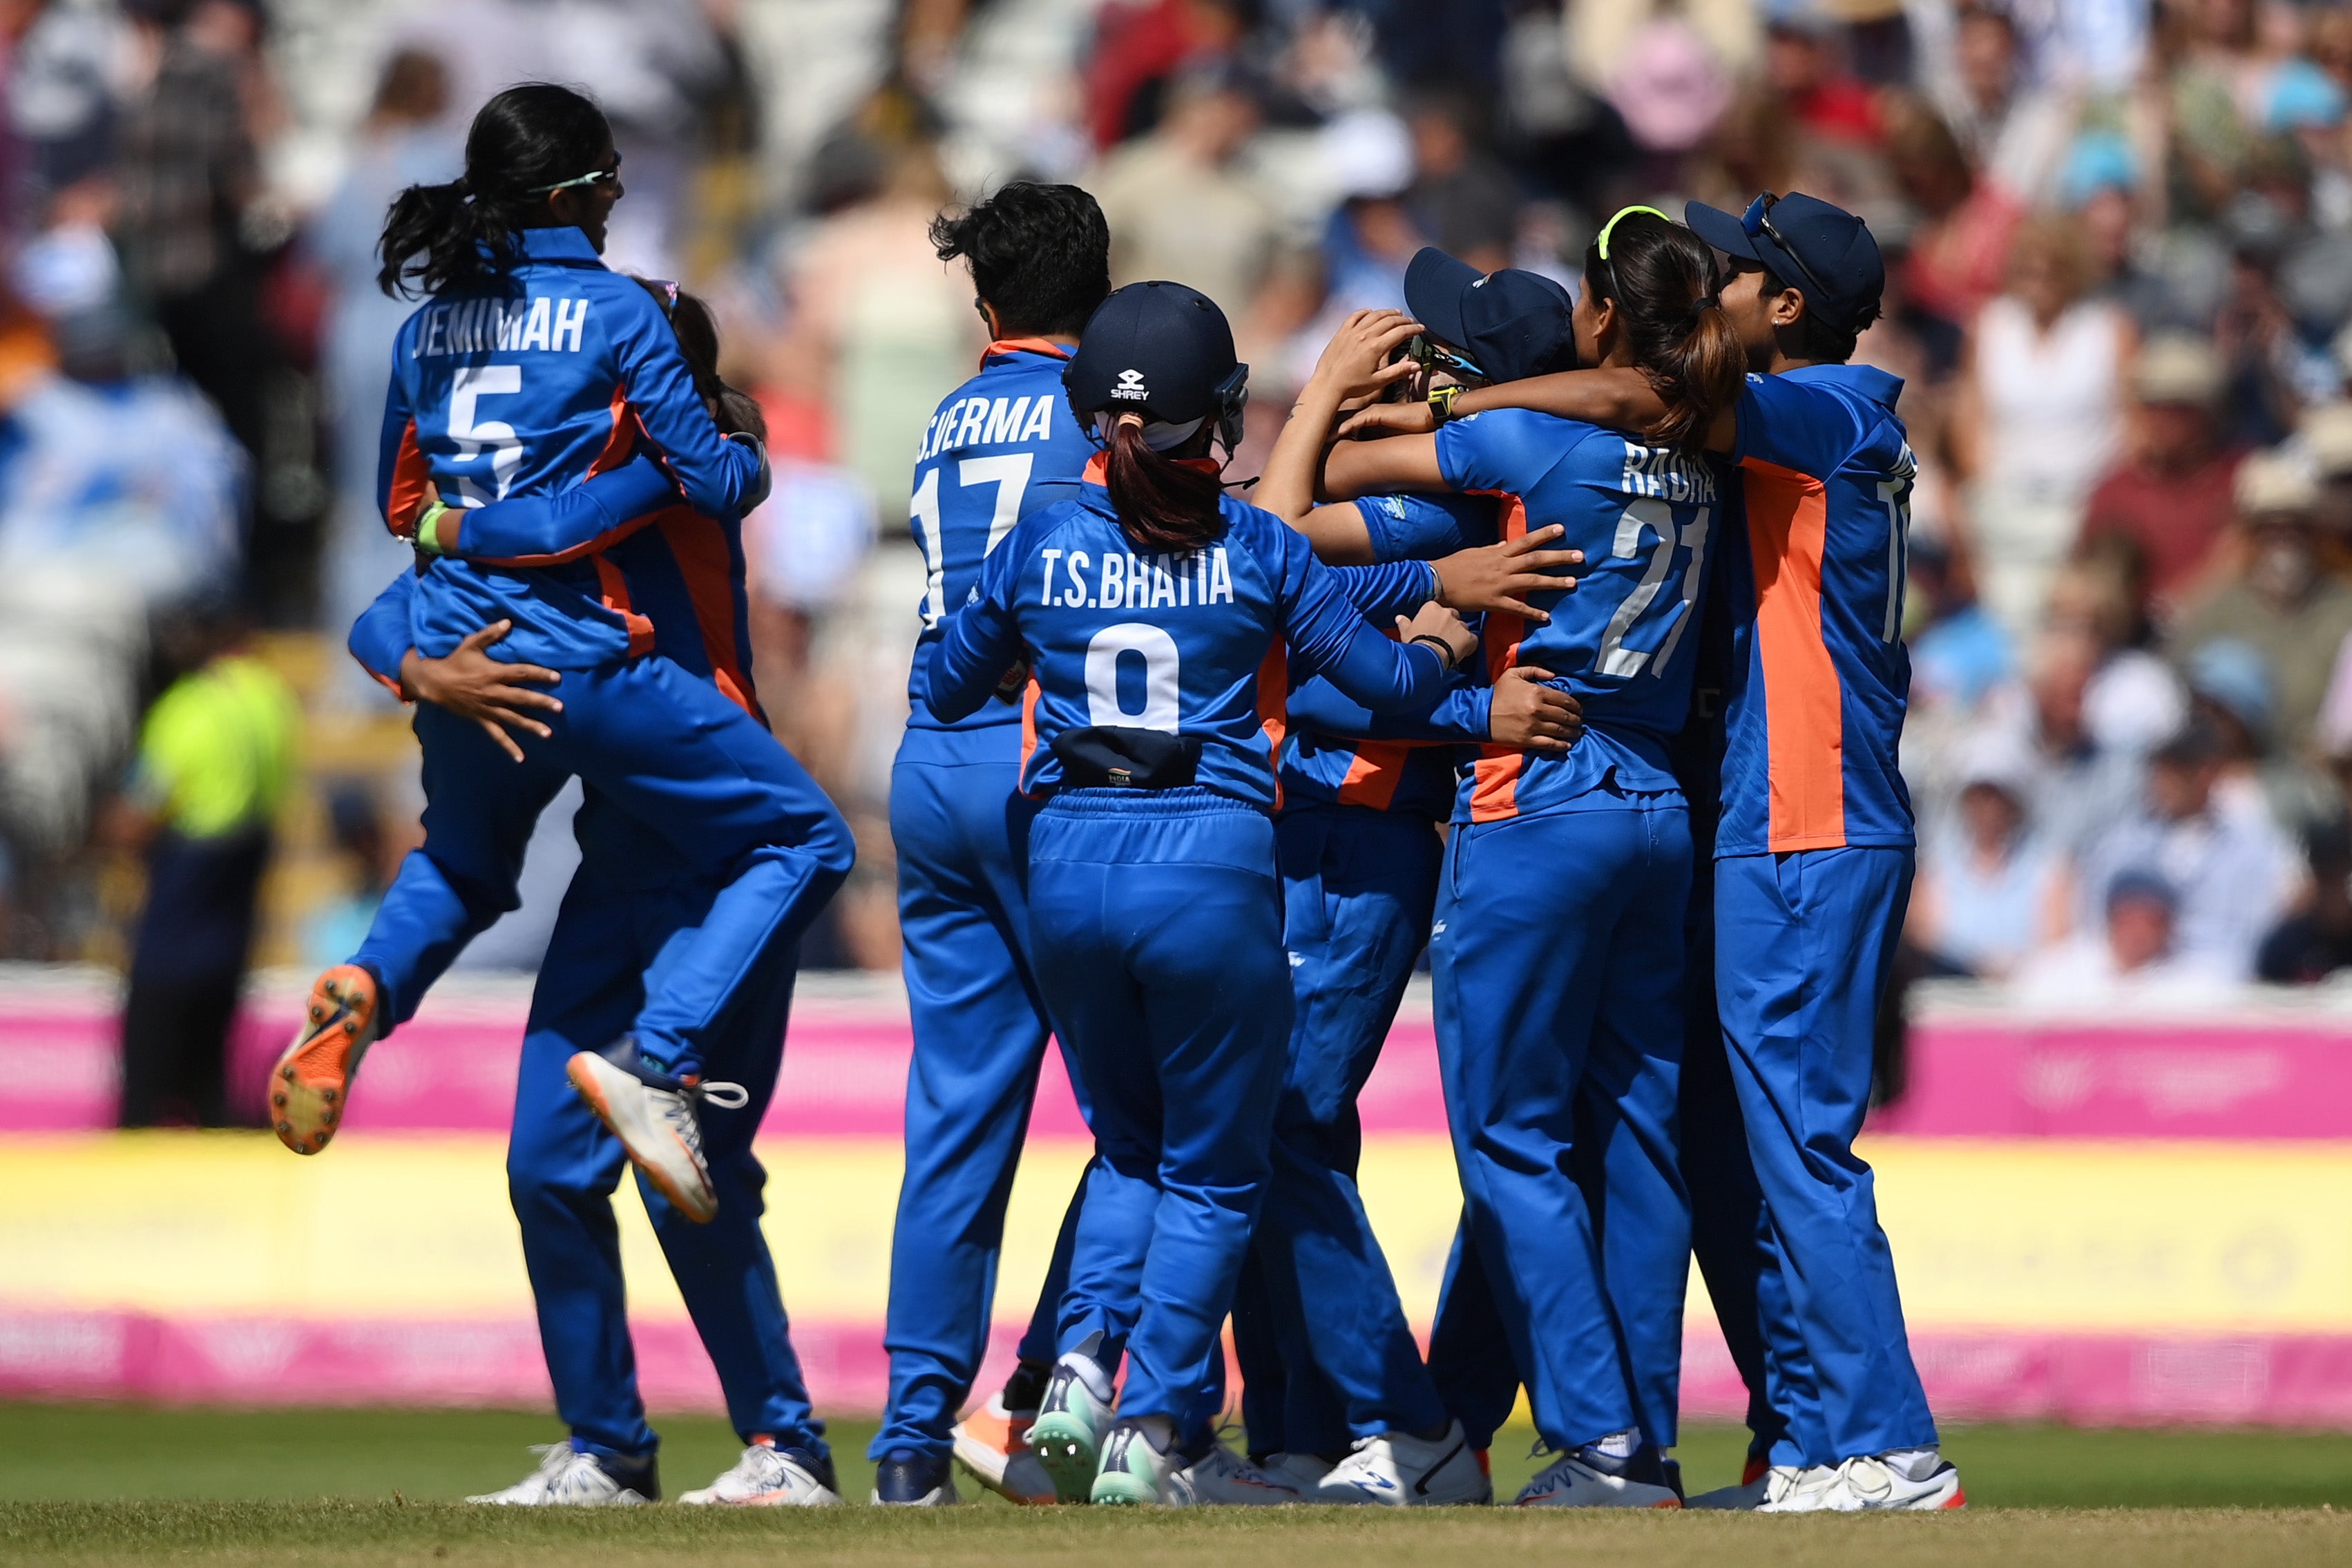 India’s women advance to Sunday’s final against Australia, with England now left to battle for bronze